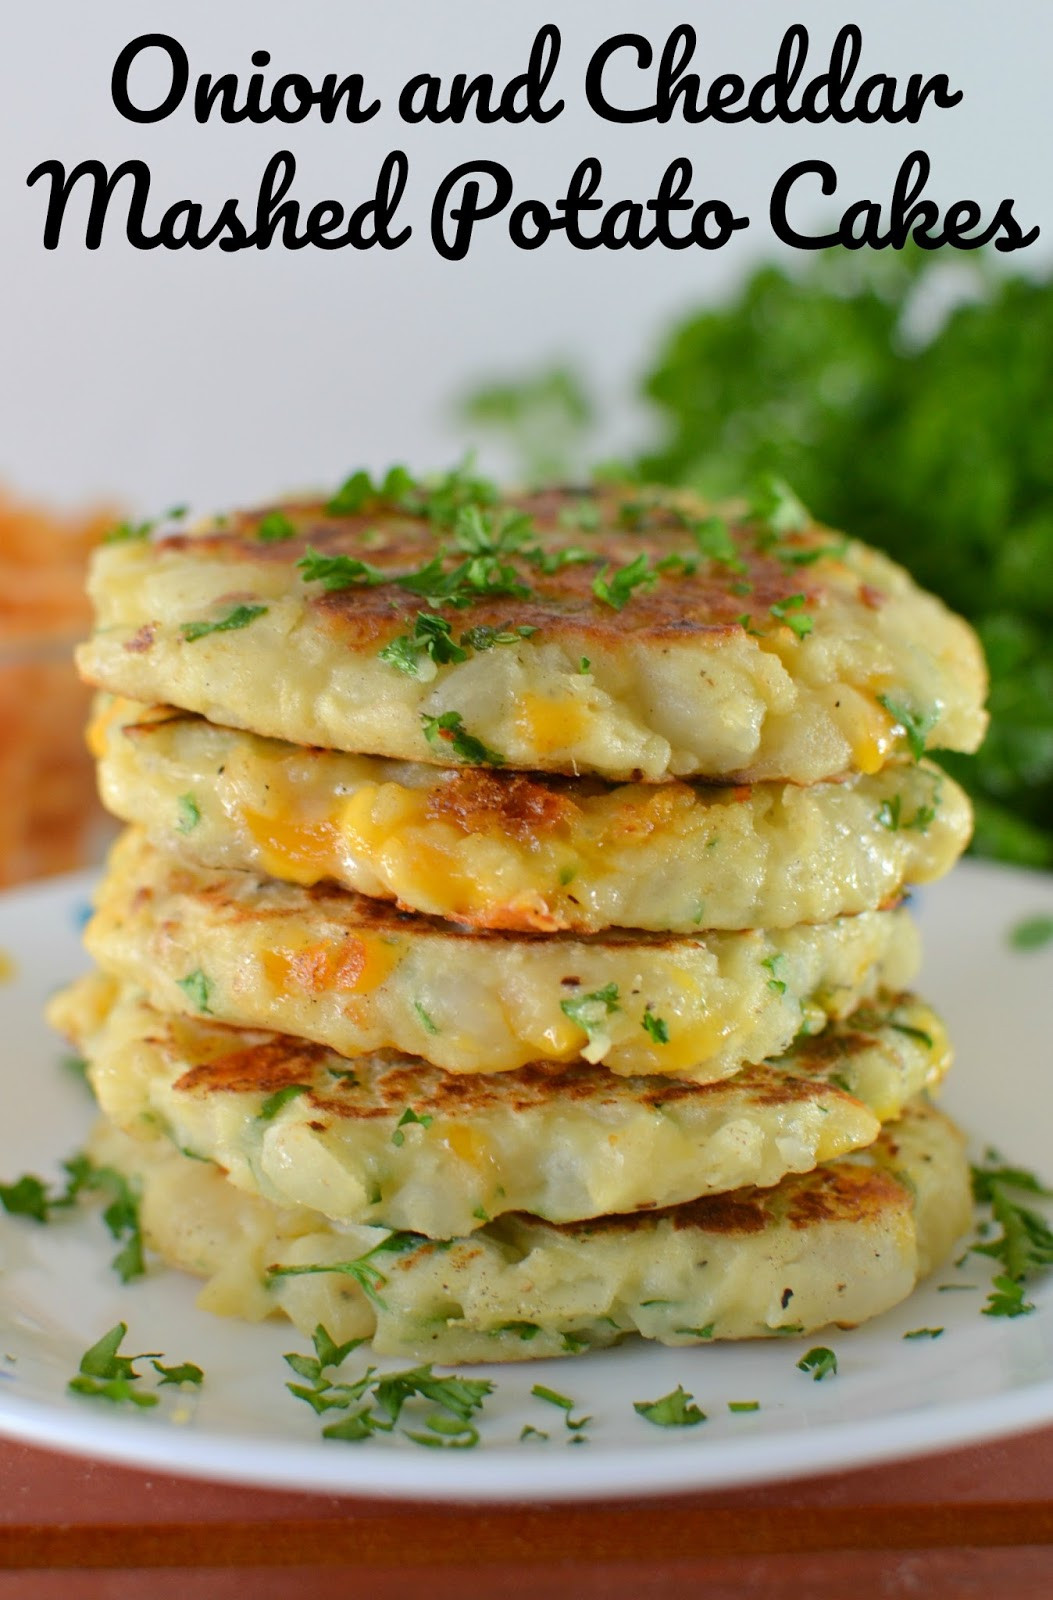 Potato Cakes Recipe
 Hot Eats and Cool Reads ion and Cheddar Mashed Potato